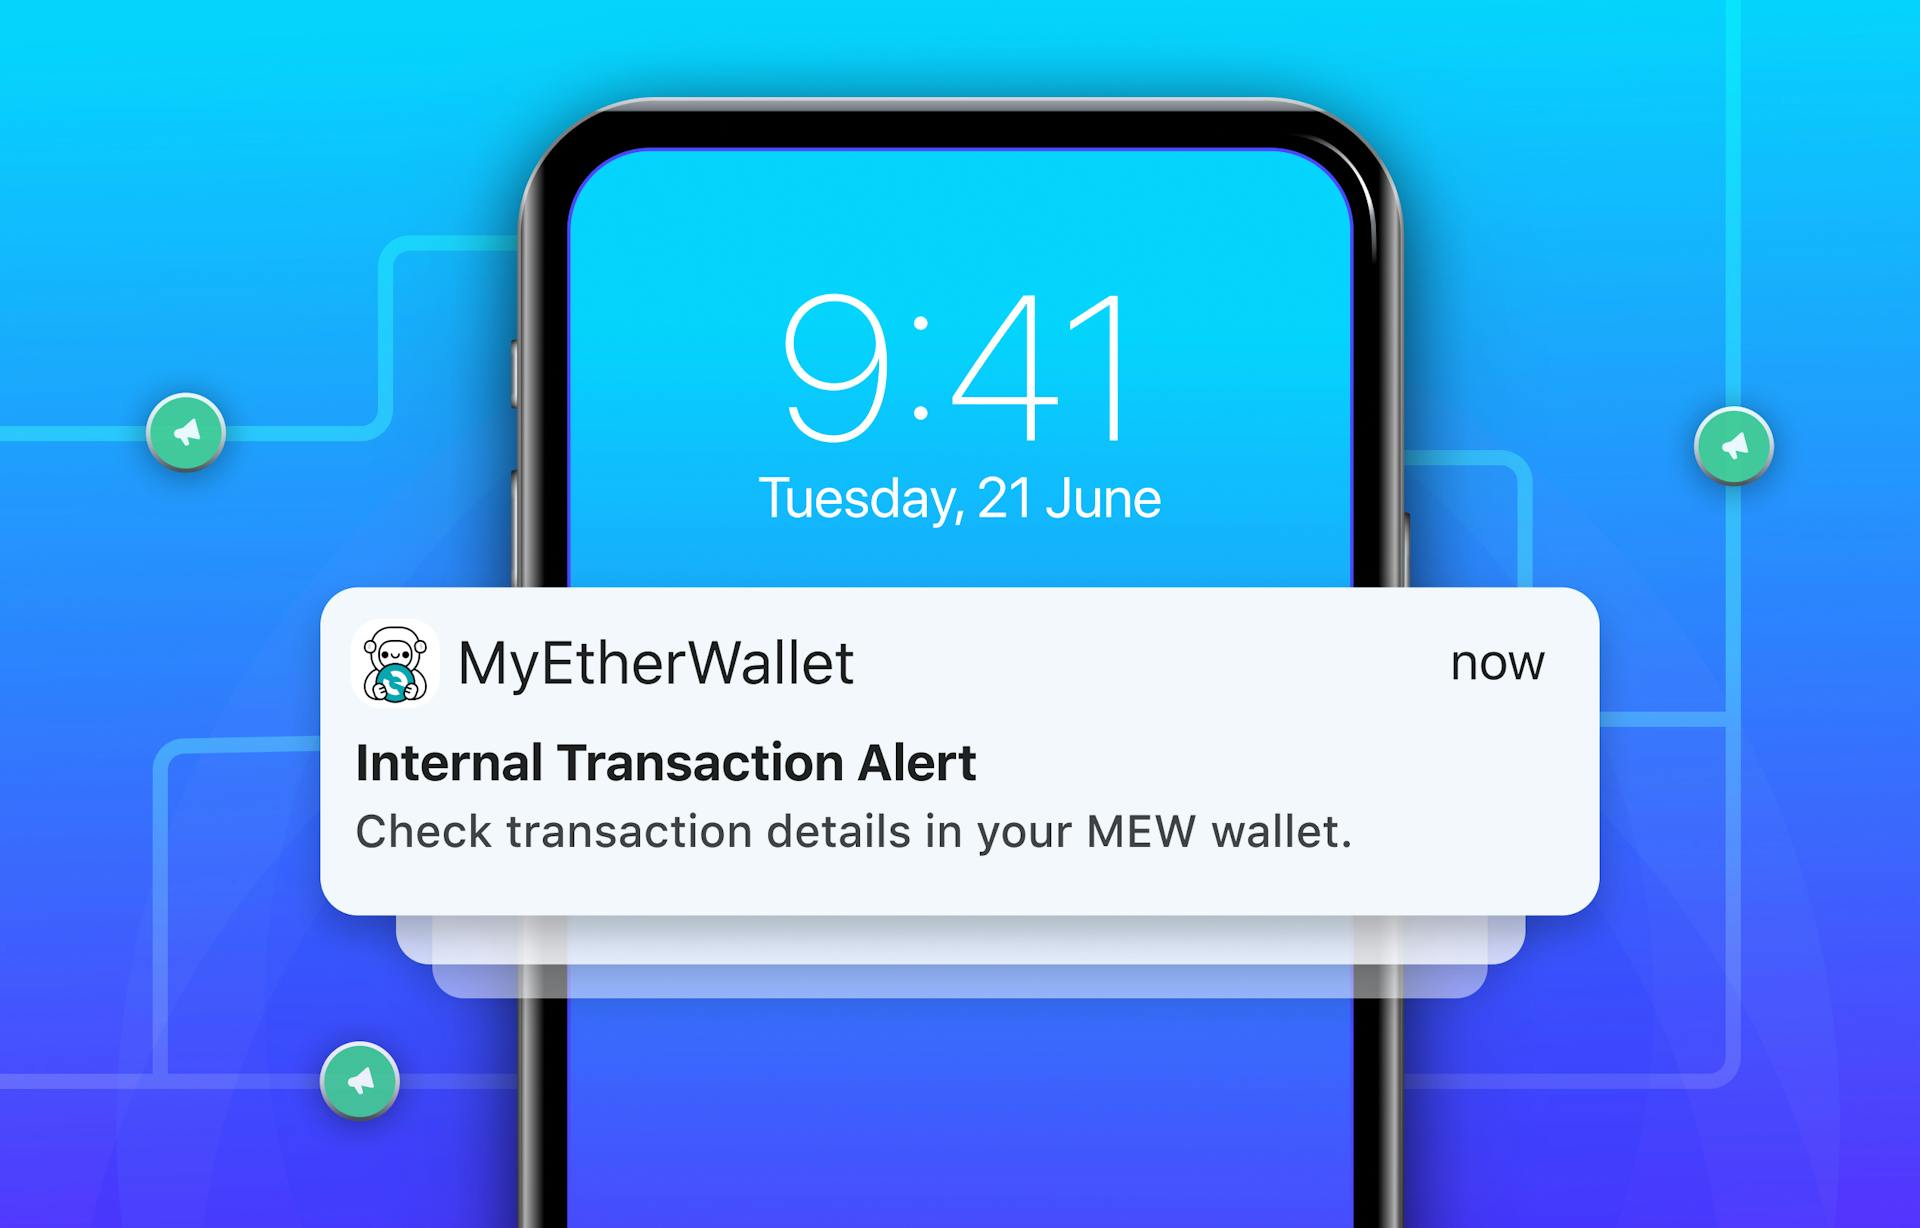 Illustration of user receiving push notifications on mobile for My Ether Wallet DApp.